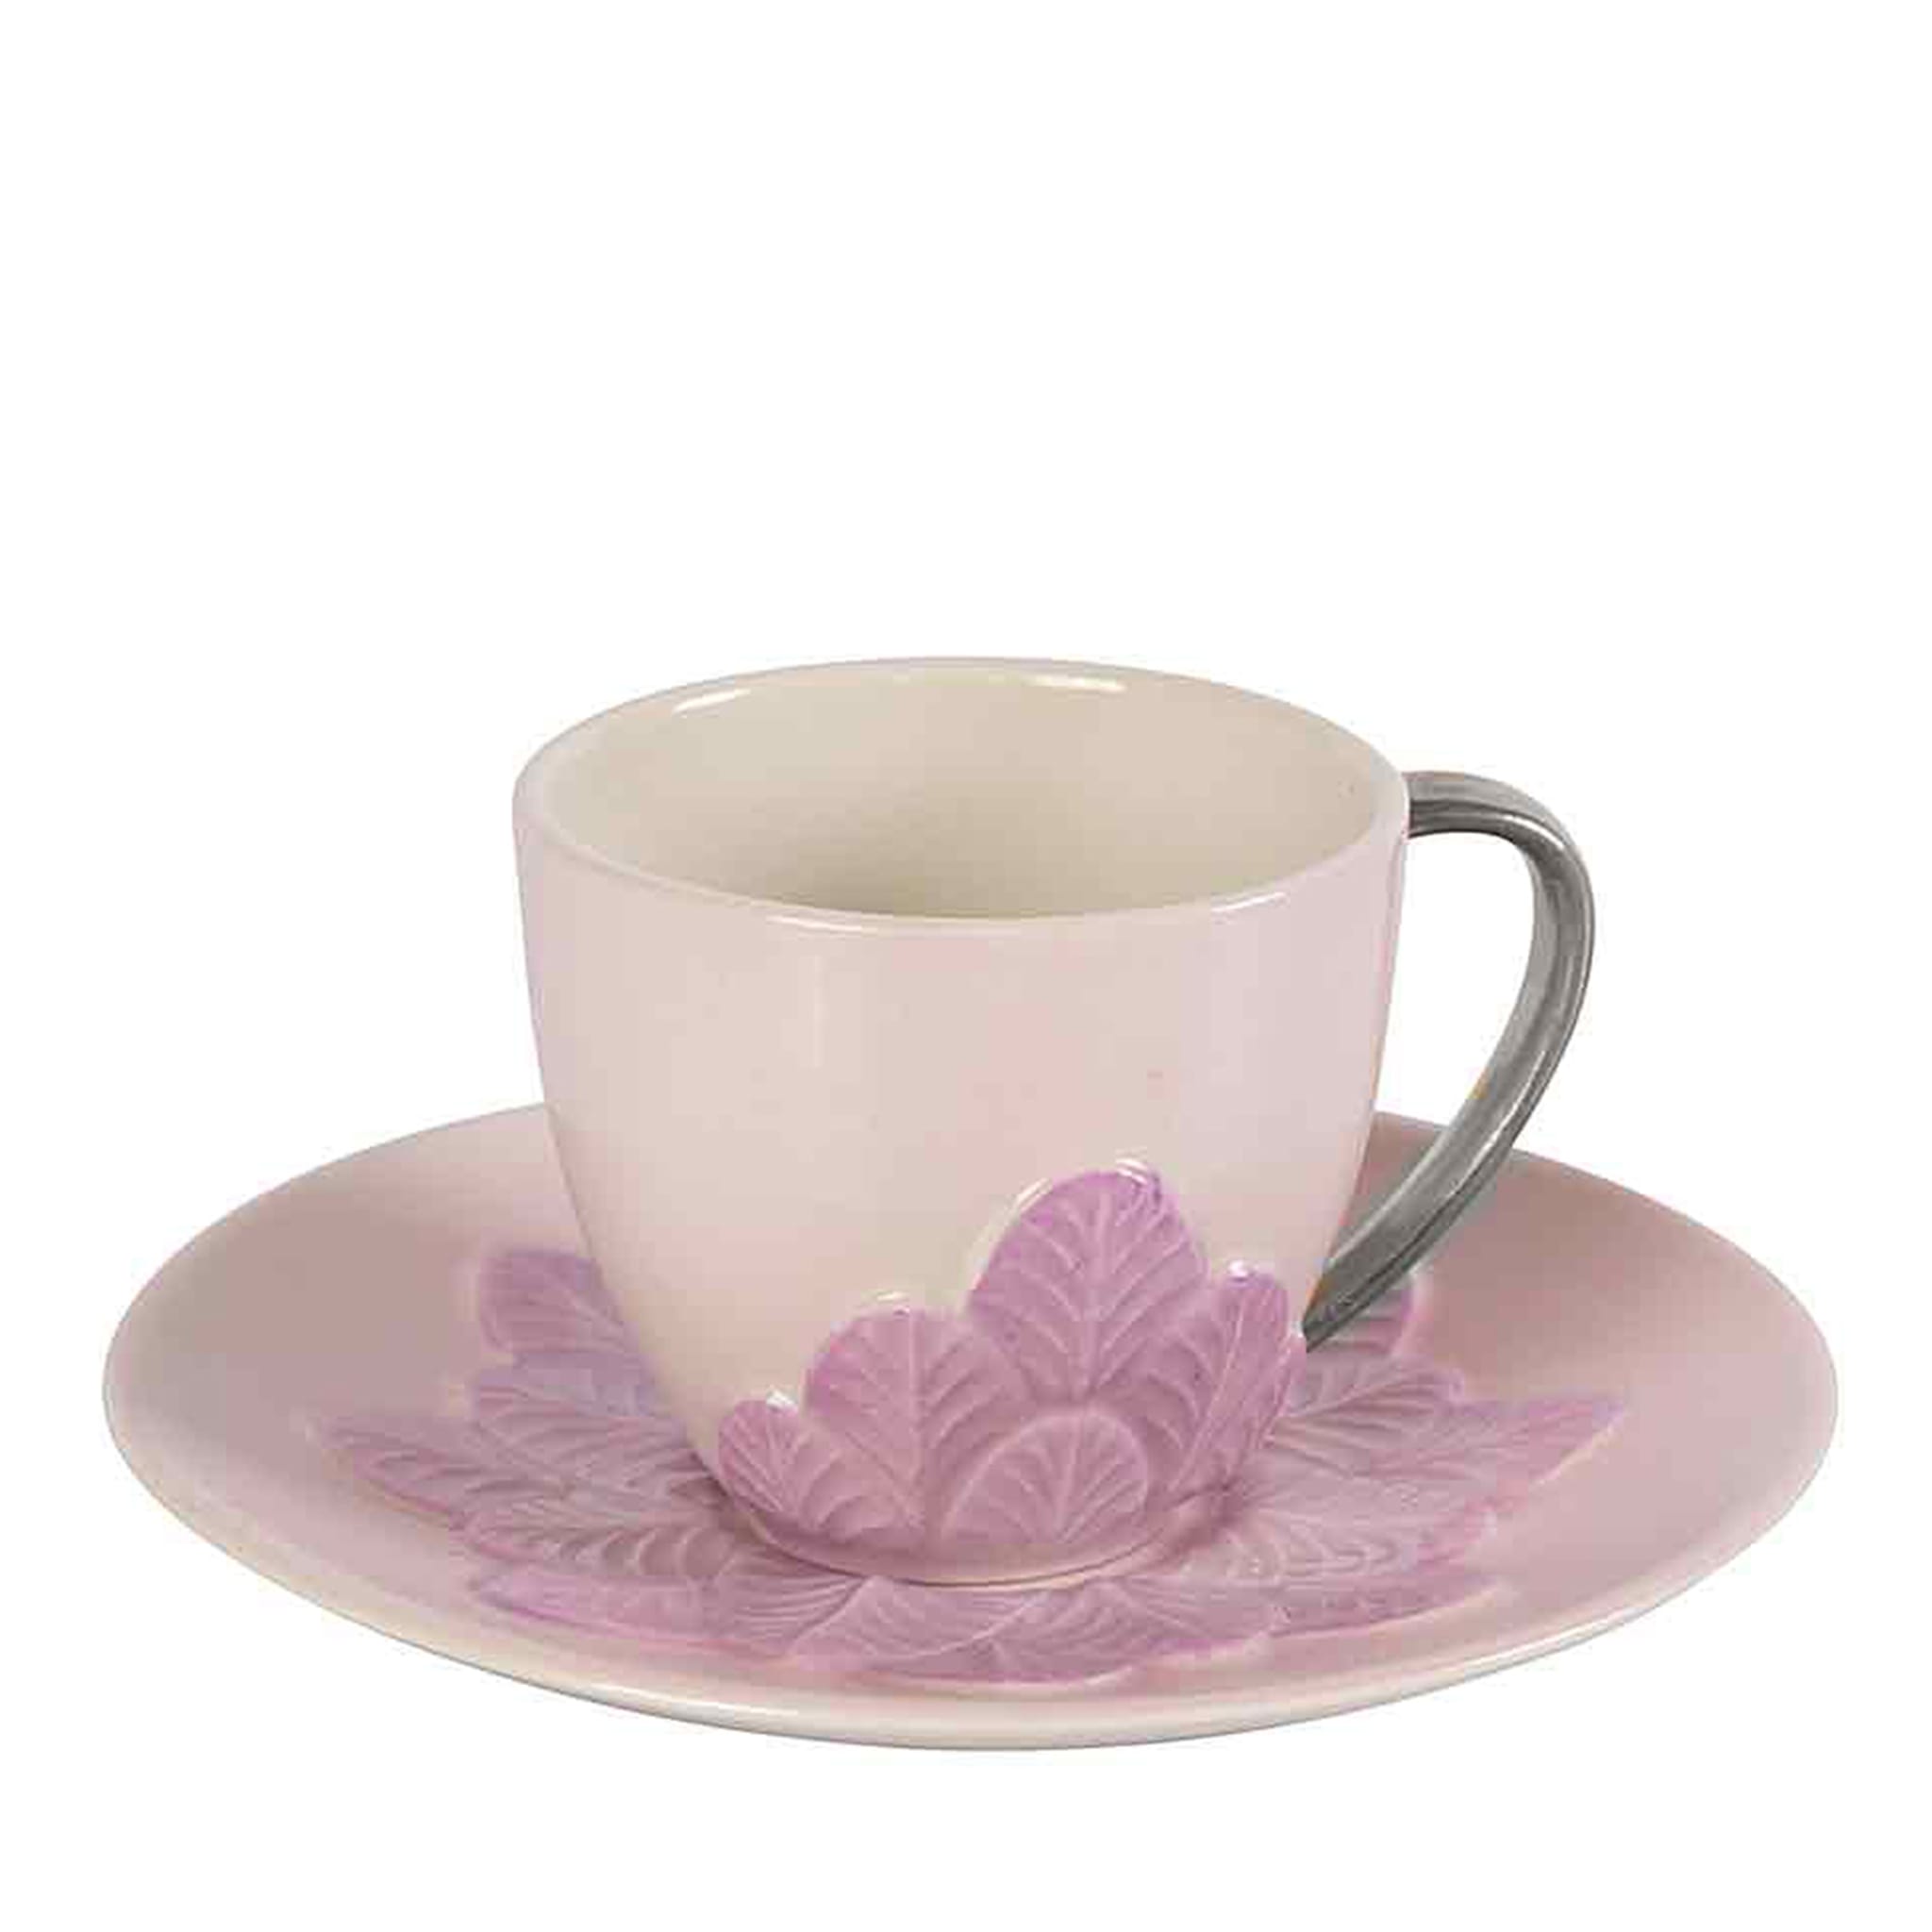  PEACOCK COFFEE CUP - PINK AND SILVER - Main view